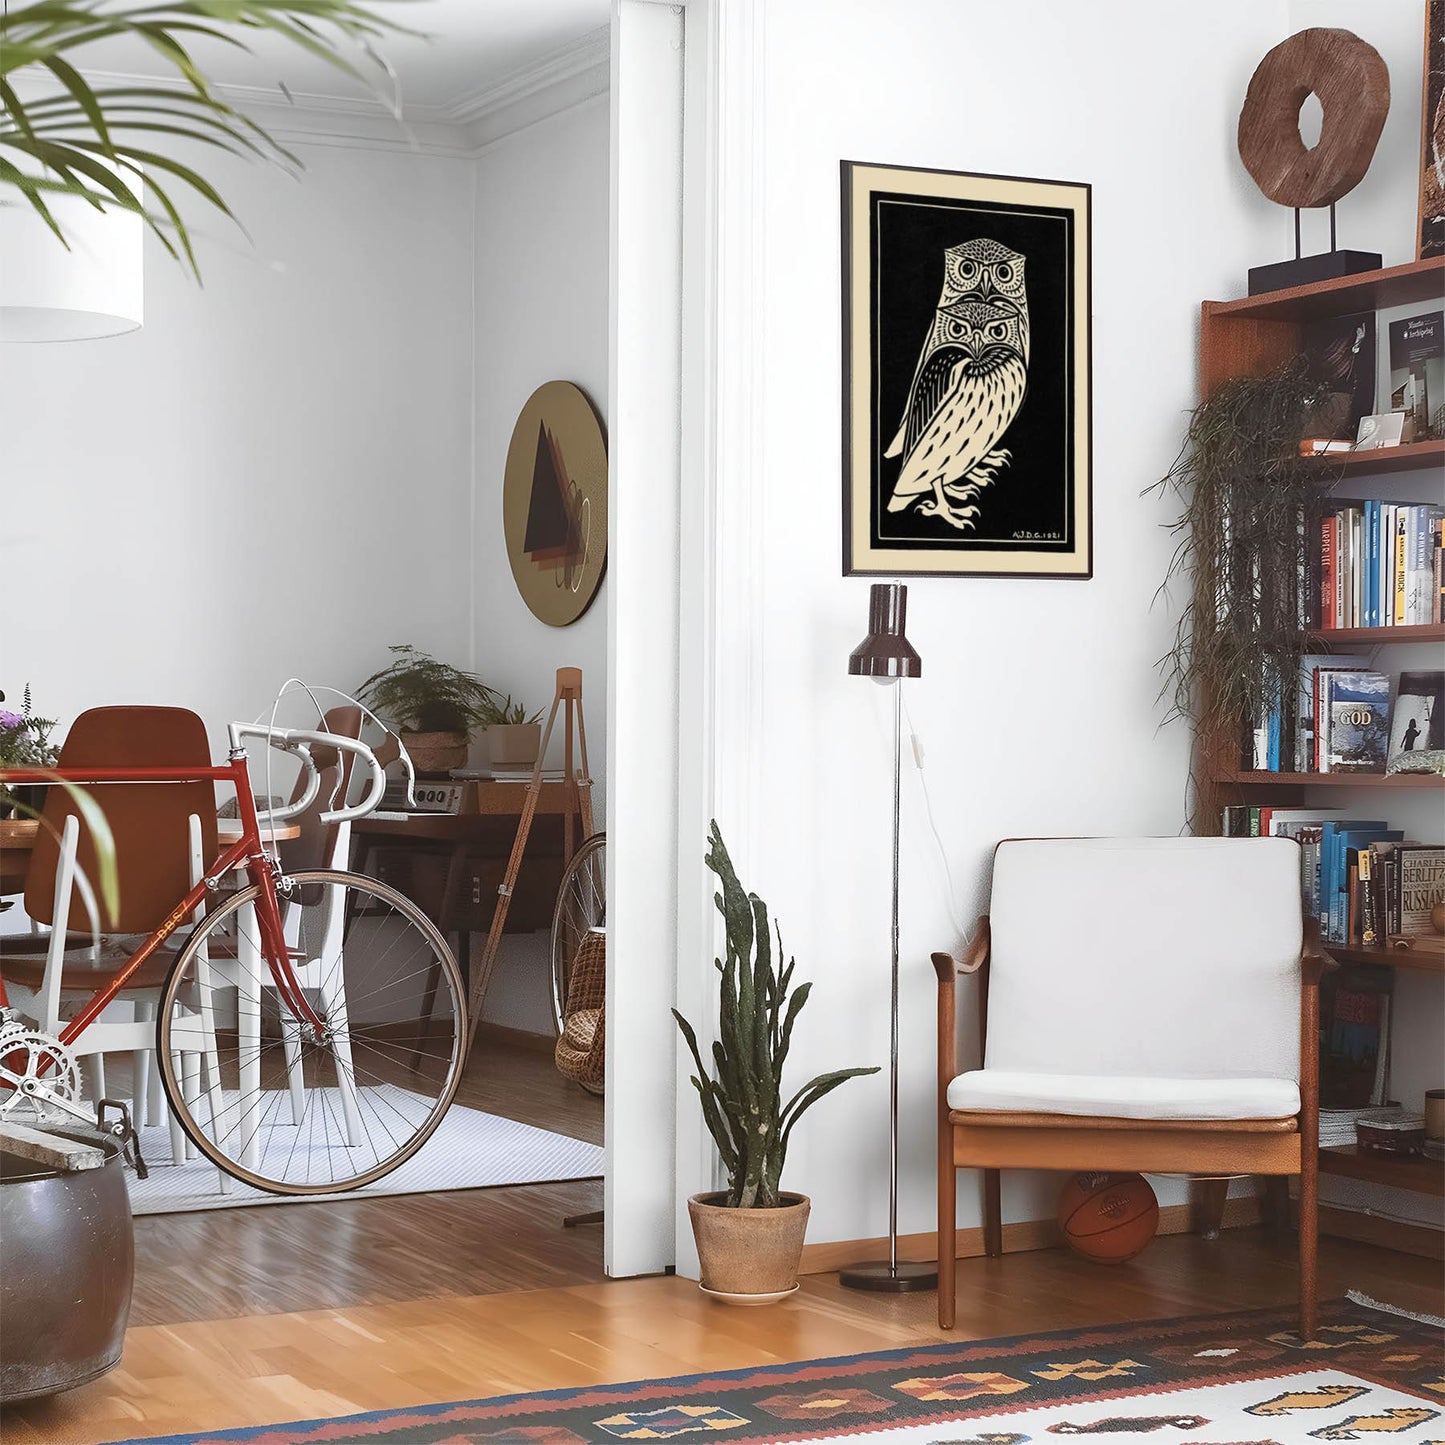 Eclectic living room with a road bike, bookshelf and house plants that features framed artwork of a Black and White Owls above a chair and lamp